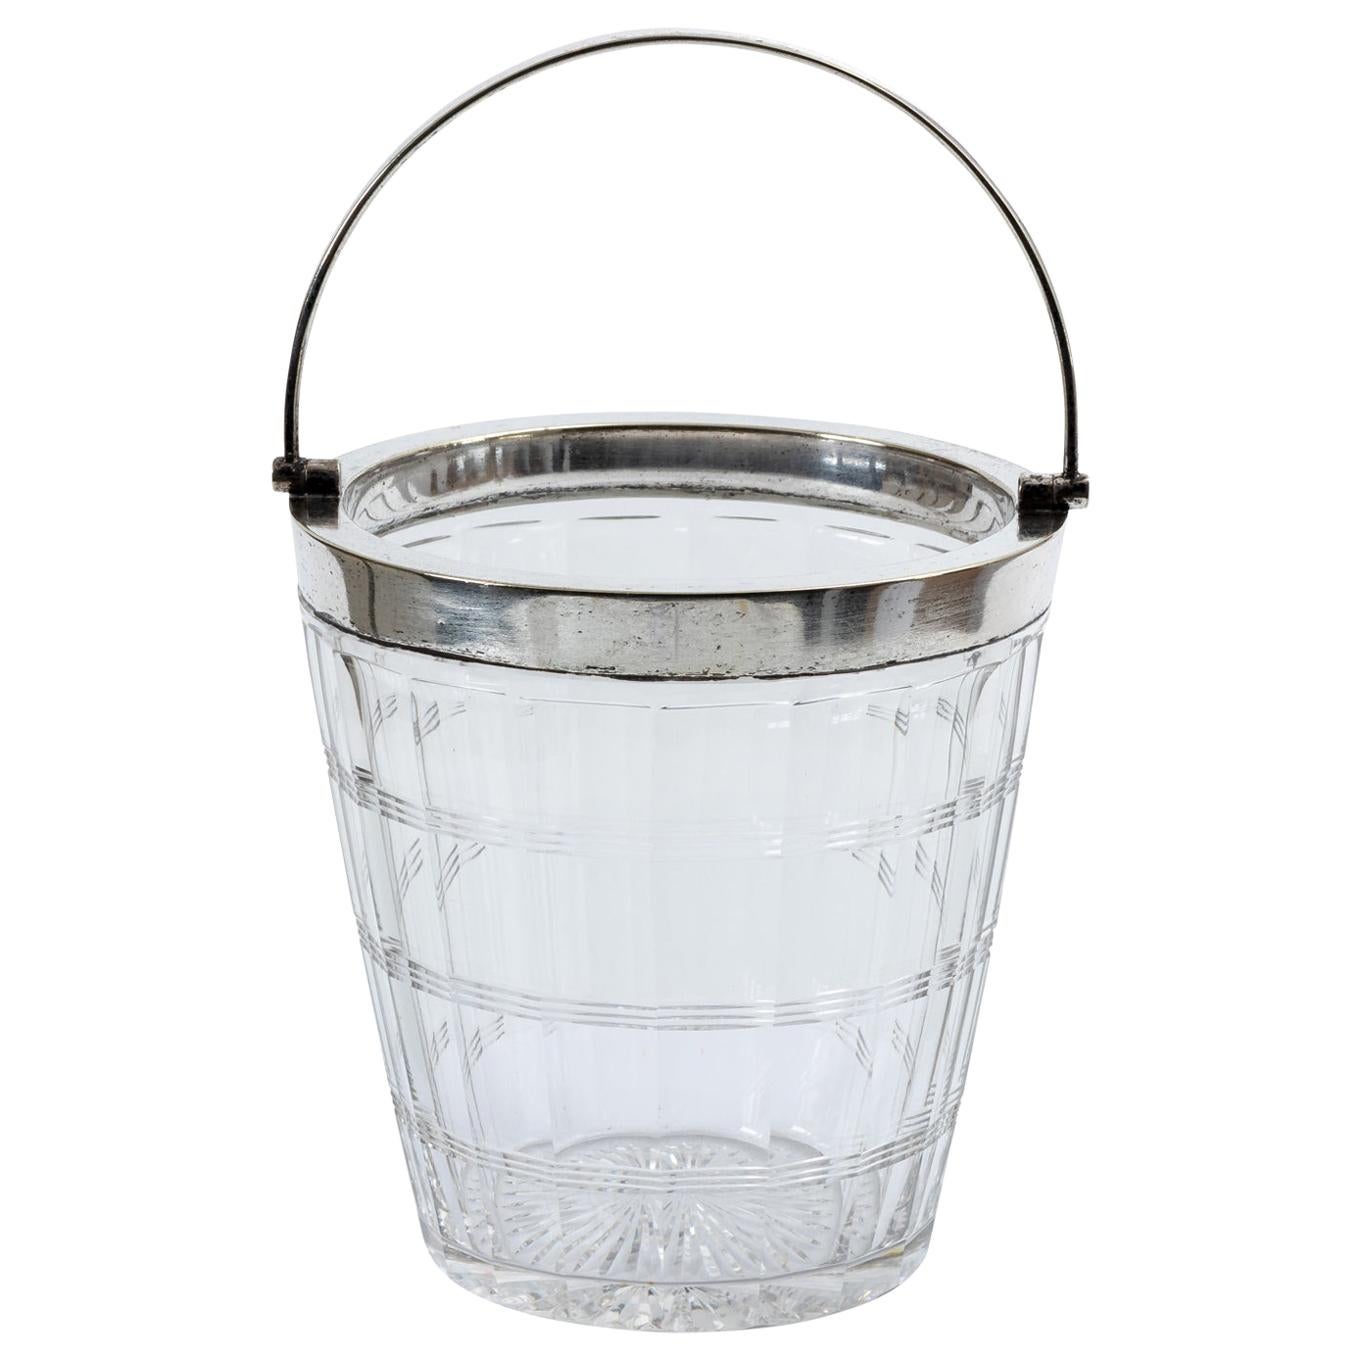 English Silver Plated Ice Pail